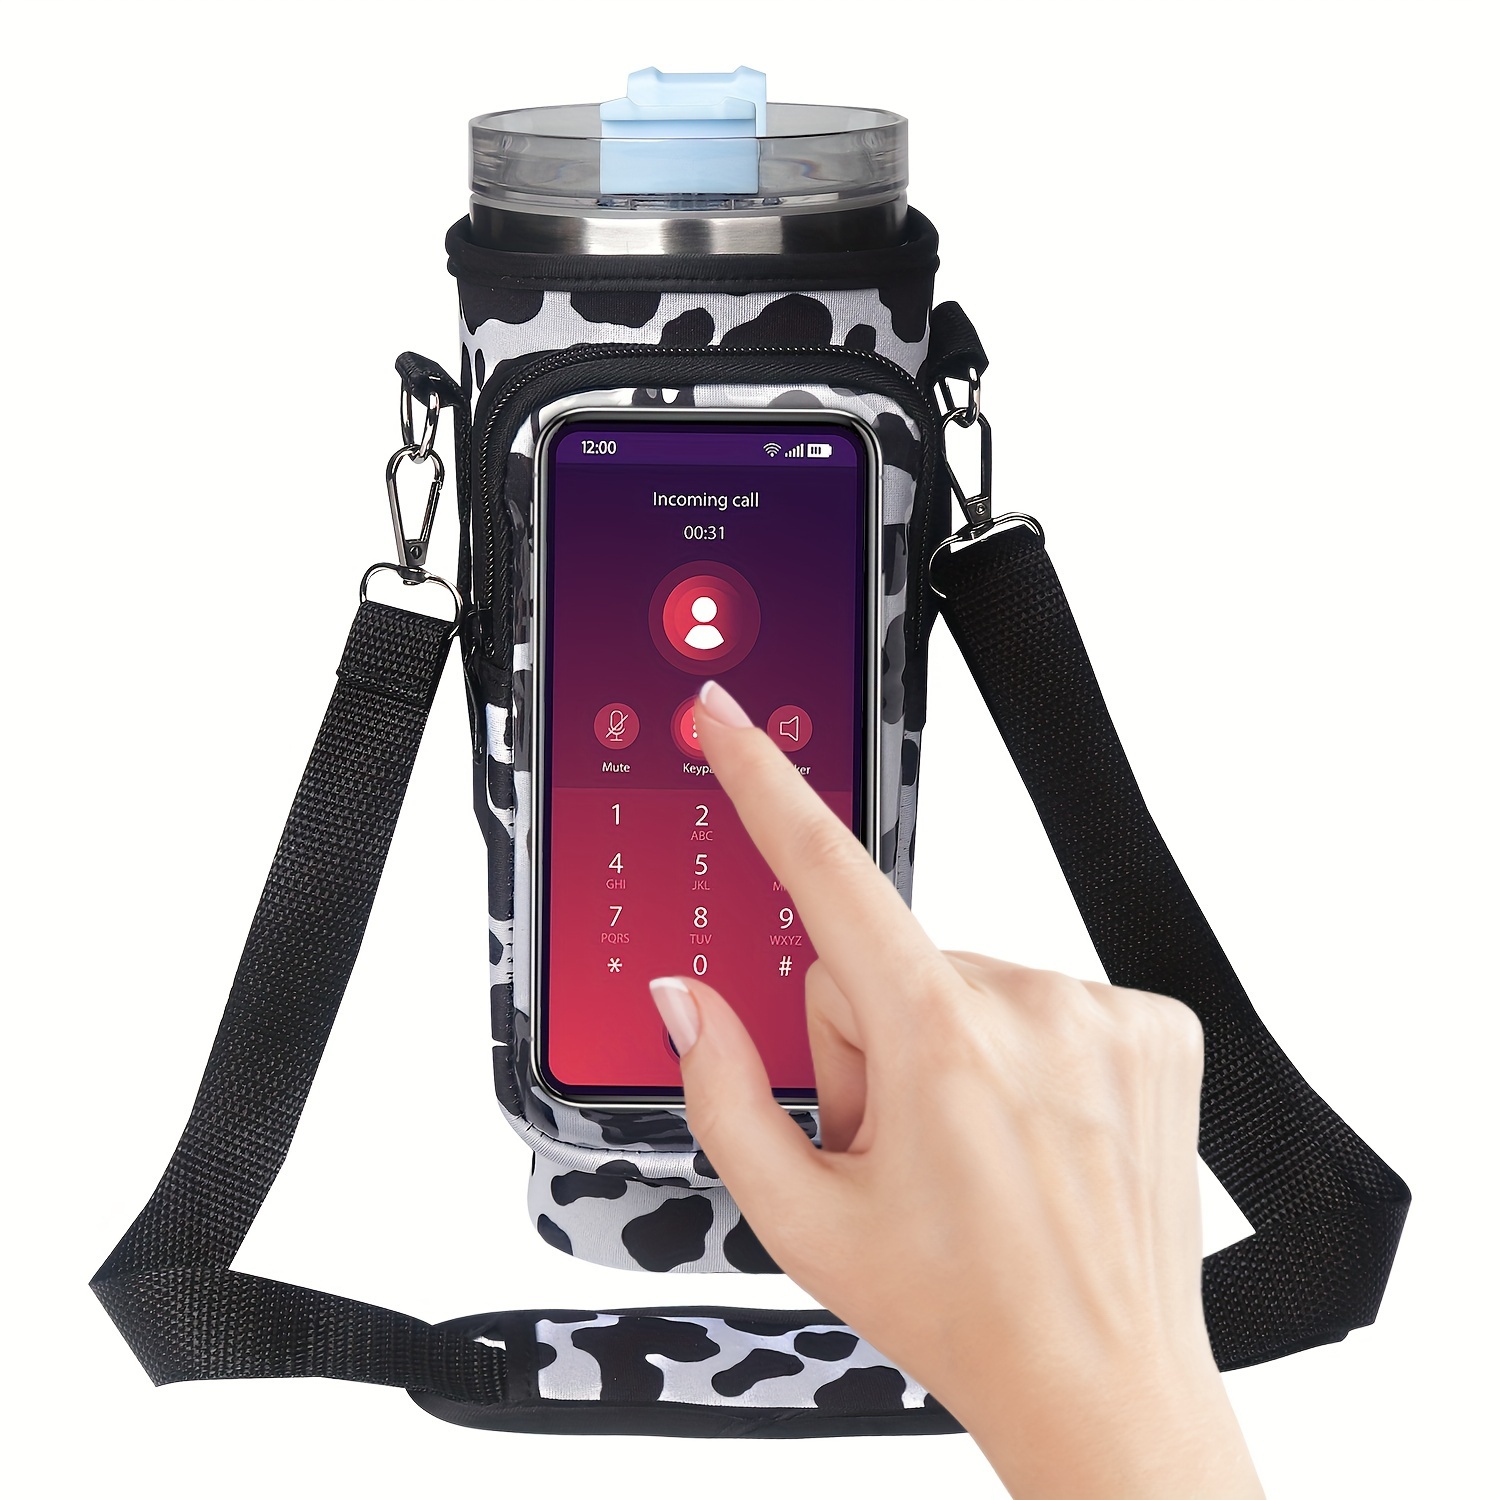 OriJoy Water Bottle Carrier Bag with Touch Screen Phone Pocket for